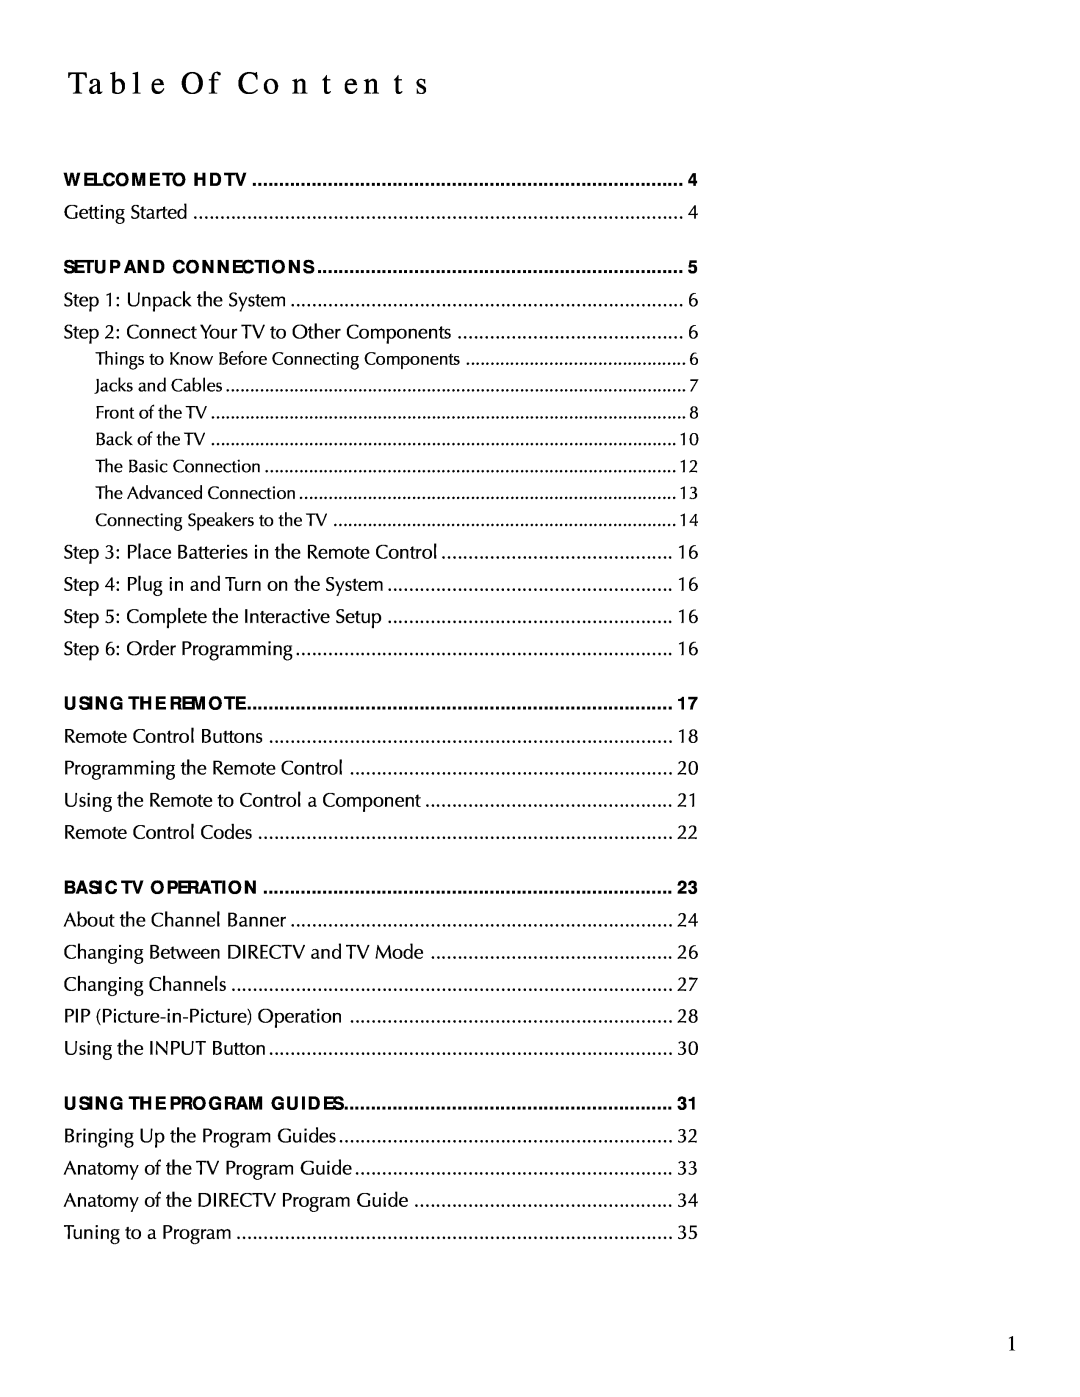 DirecTV HDTV user manual Table Of Contents 